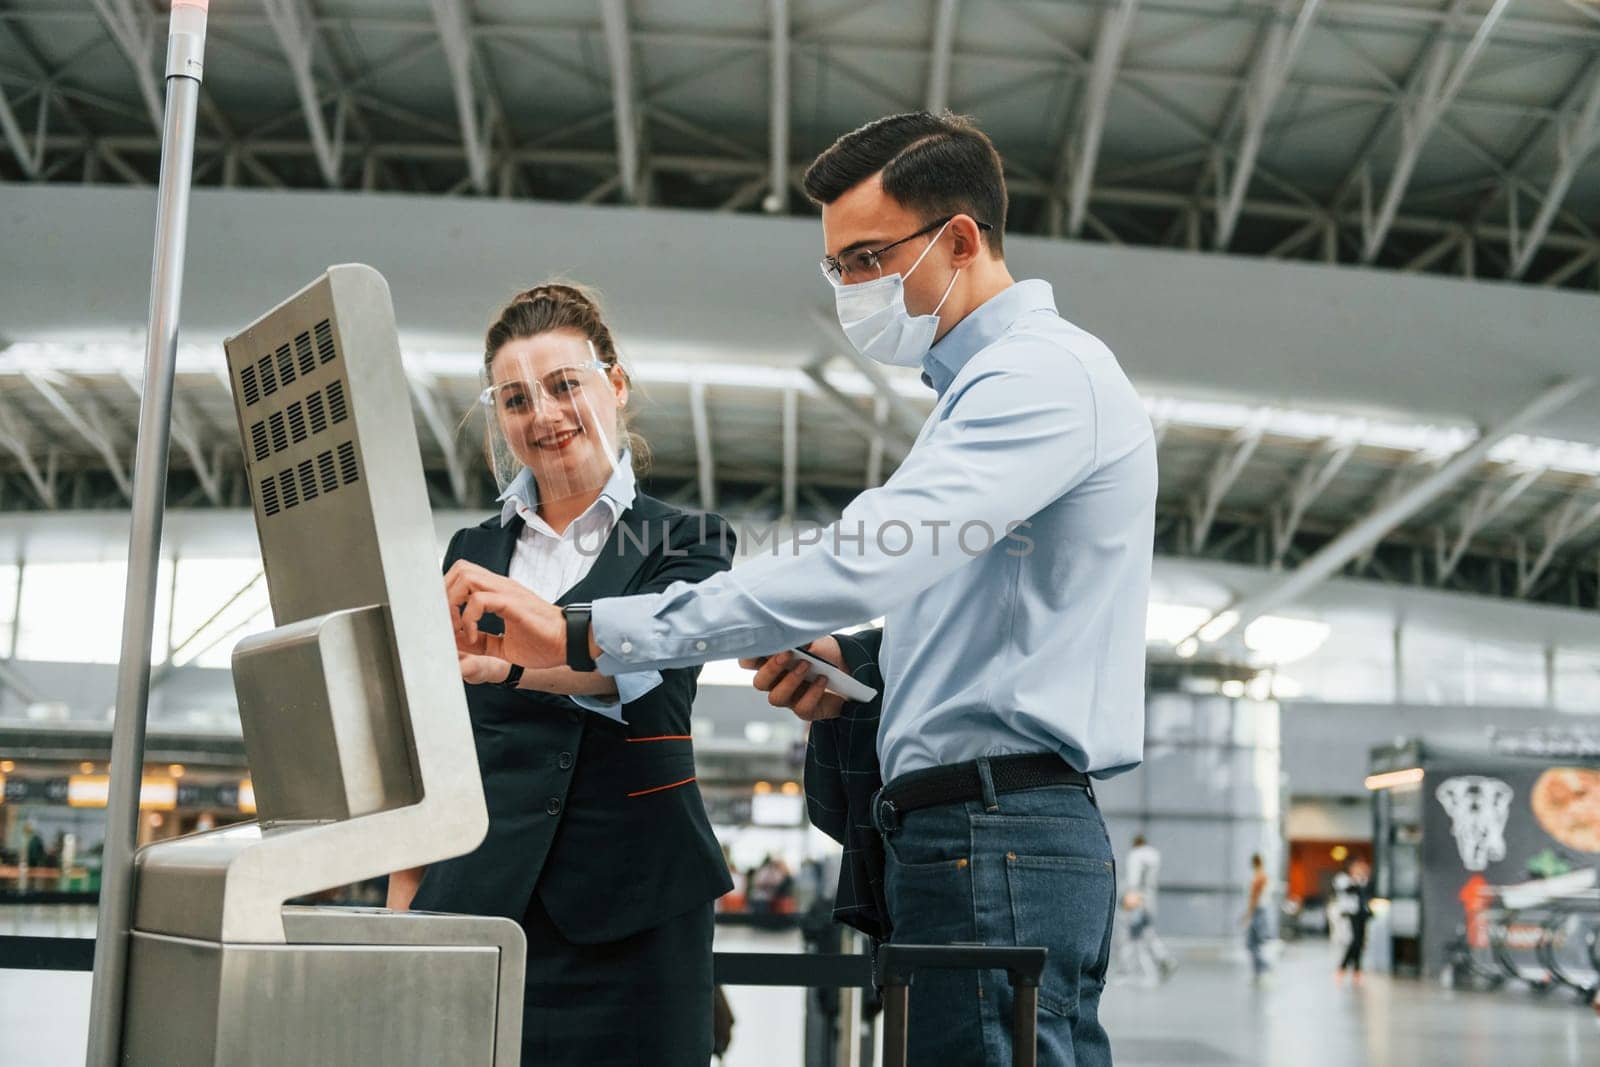 Employee helping using terminal. Young businessman in formal clothes is in the airport at daytime by Standret